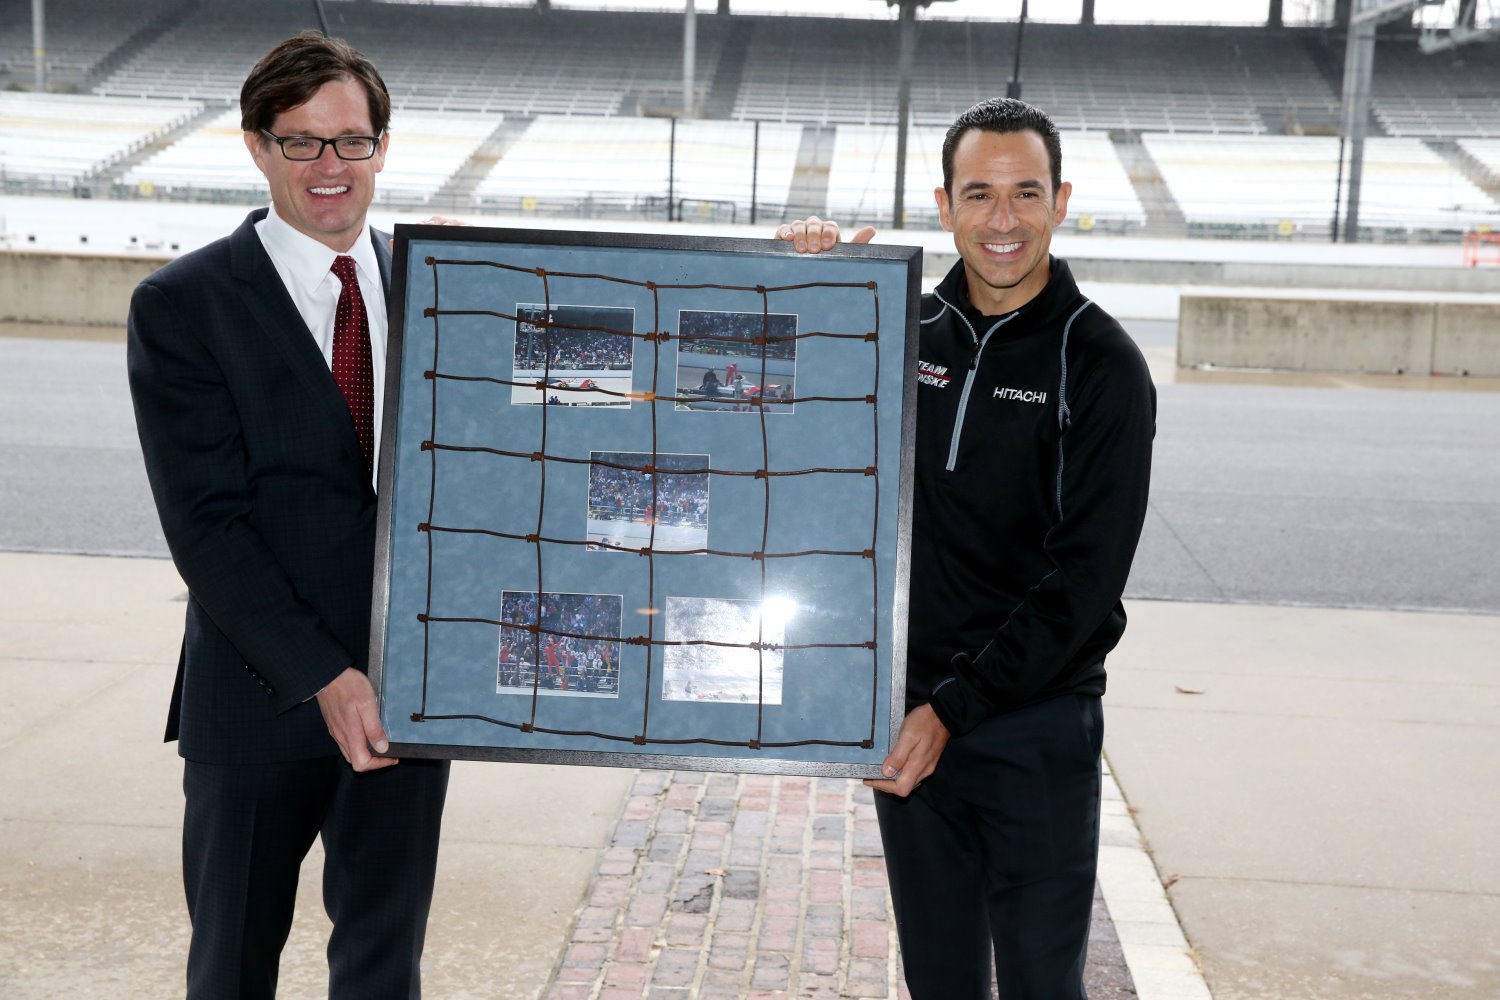 Doug Boles presents Castroneves with piece of fence